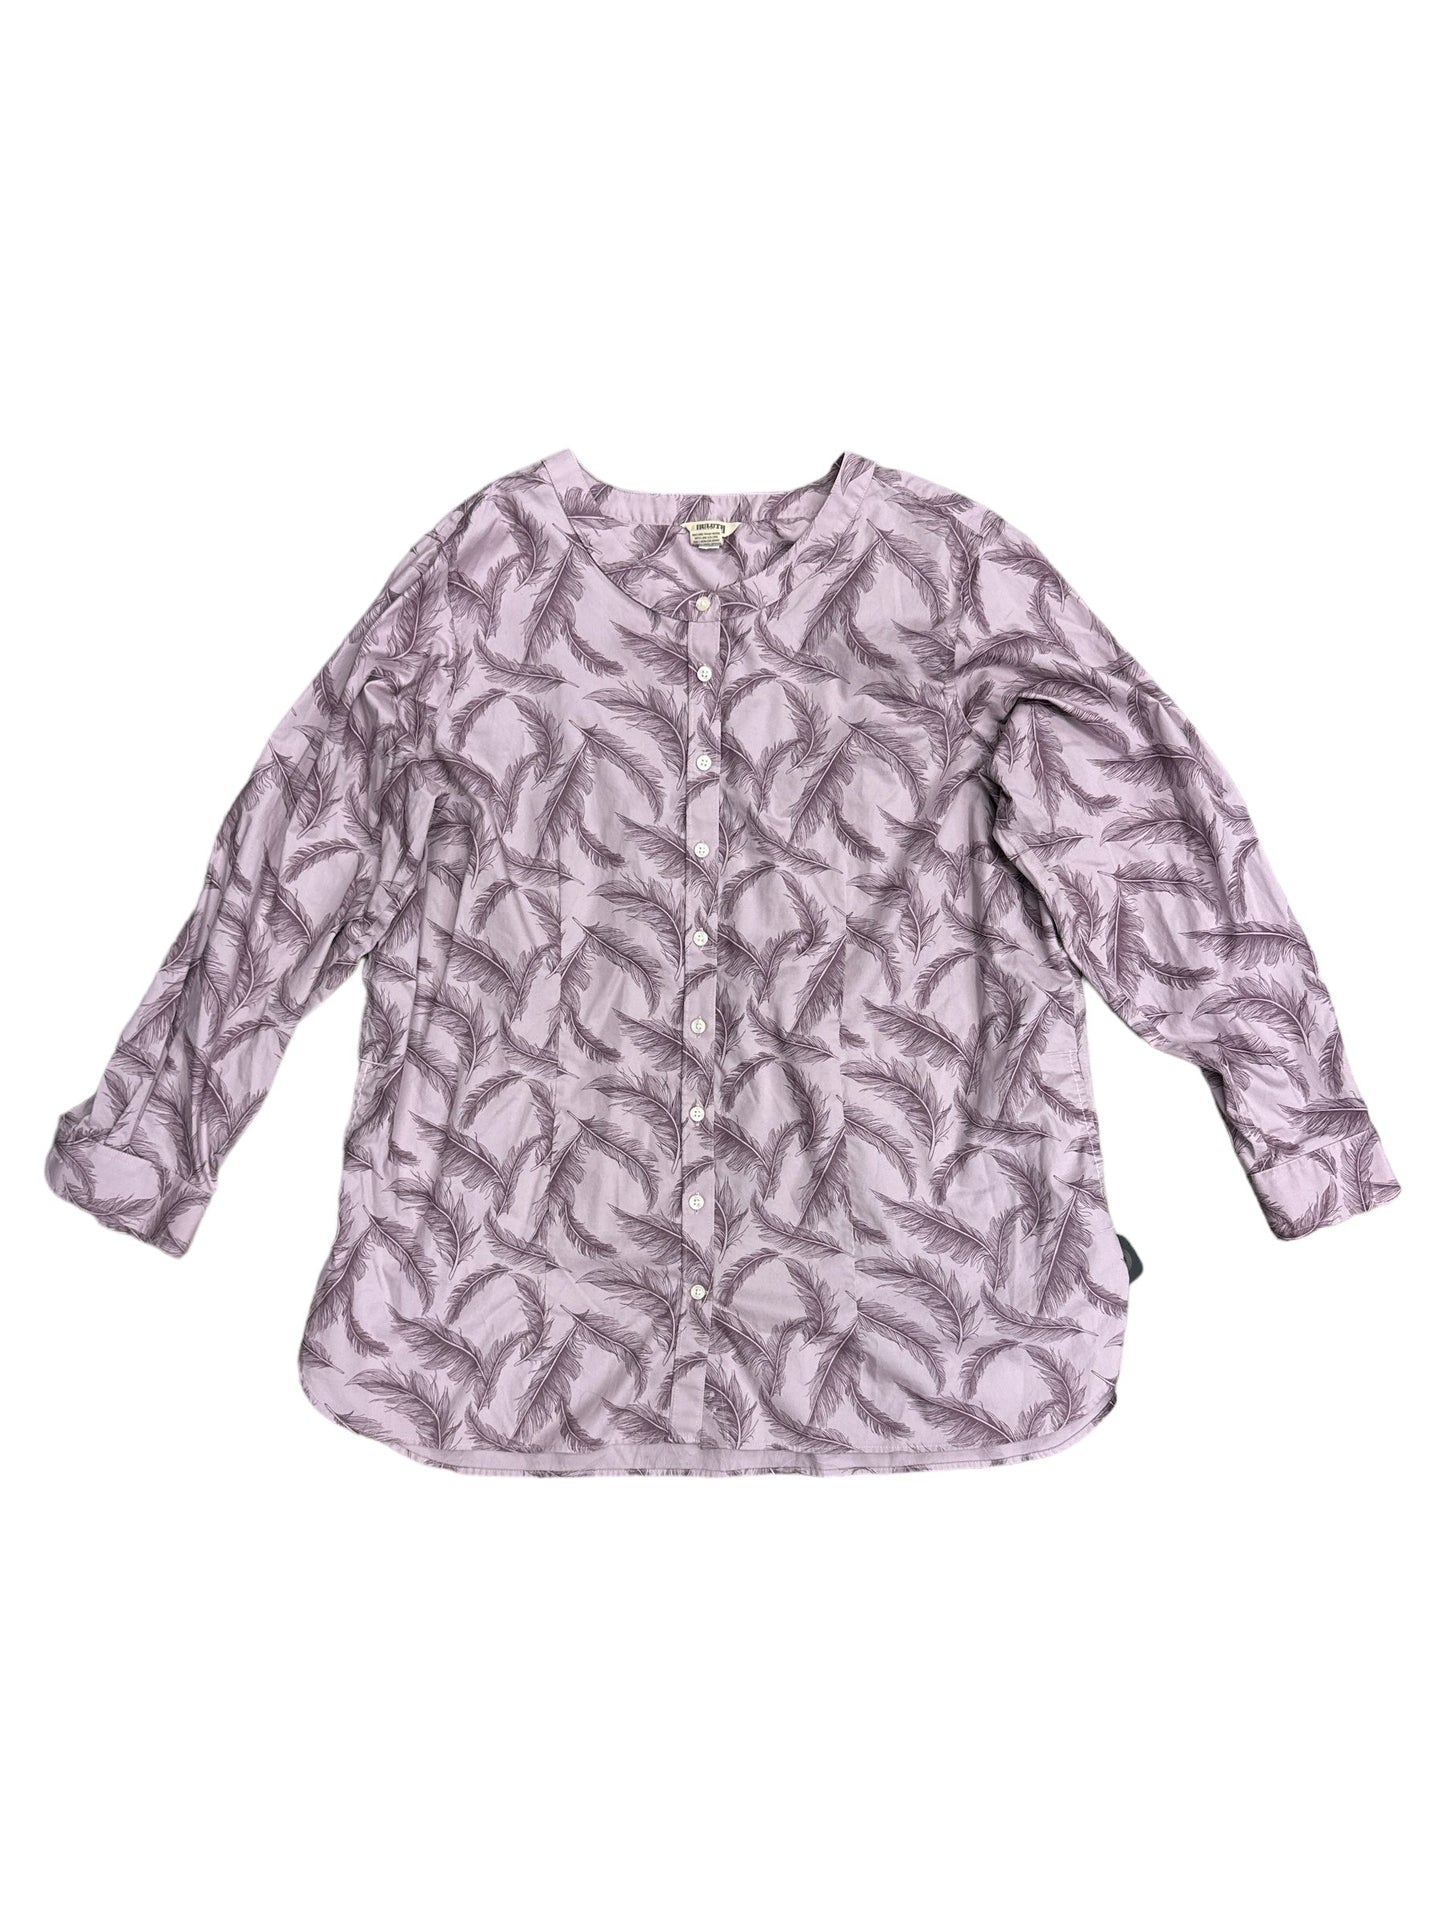 Purple Top Long Sleeve Duluth Trading, Size 1x